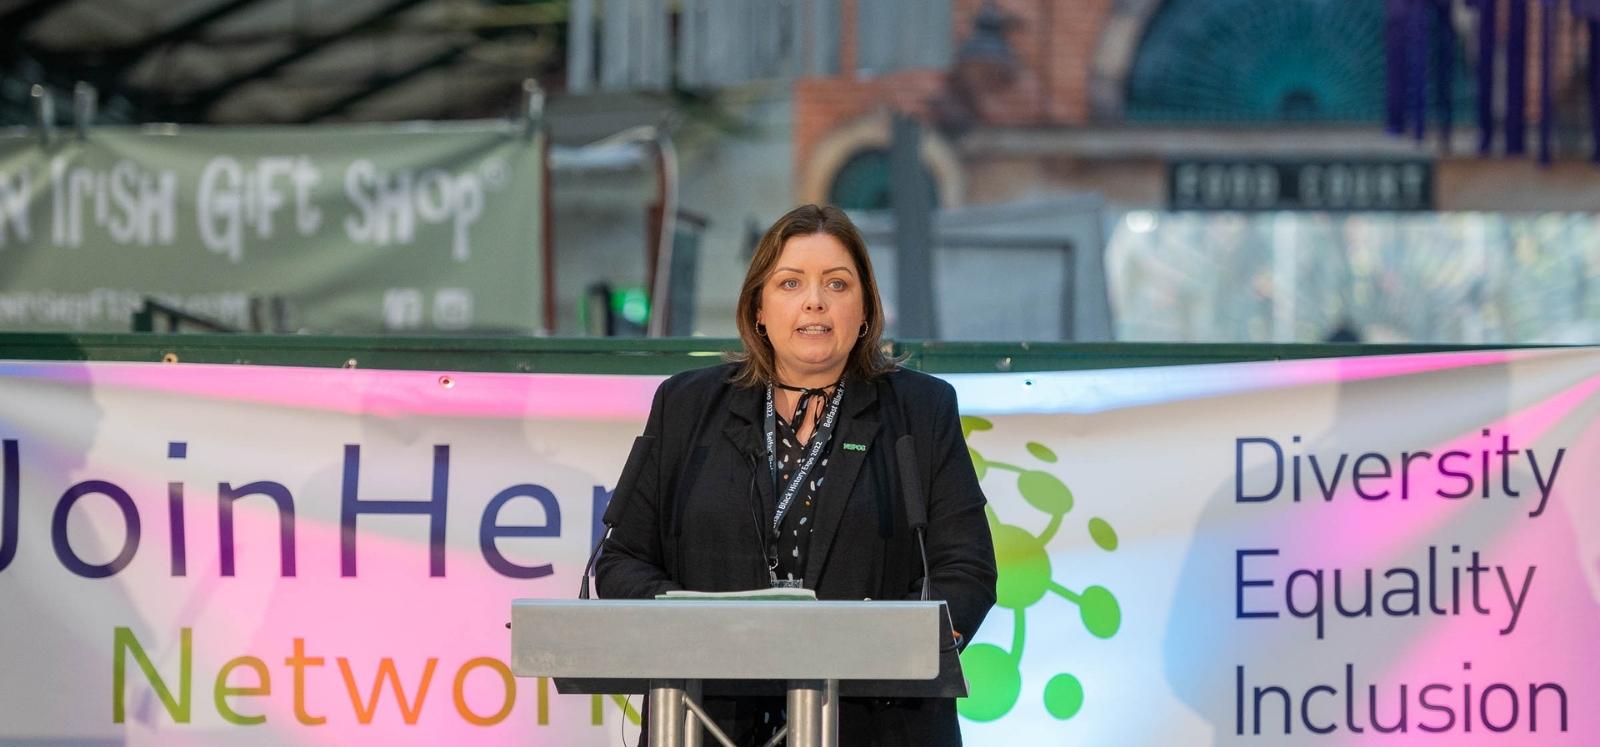 Minister for Communities Deirdre Hargey opening the Black History Month expo, St George's Market